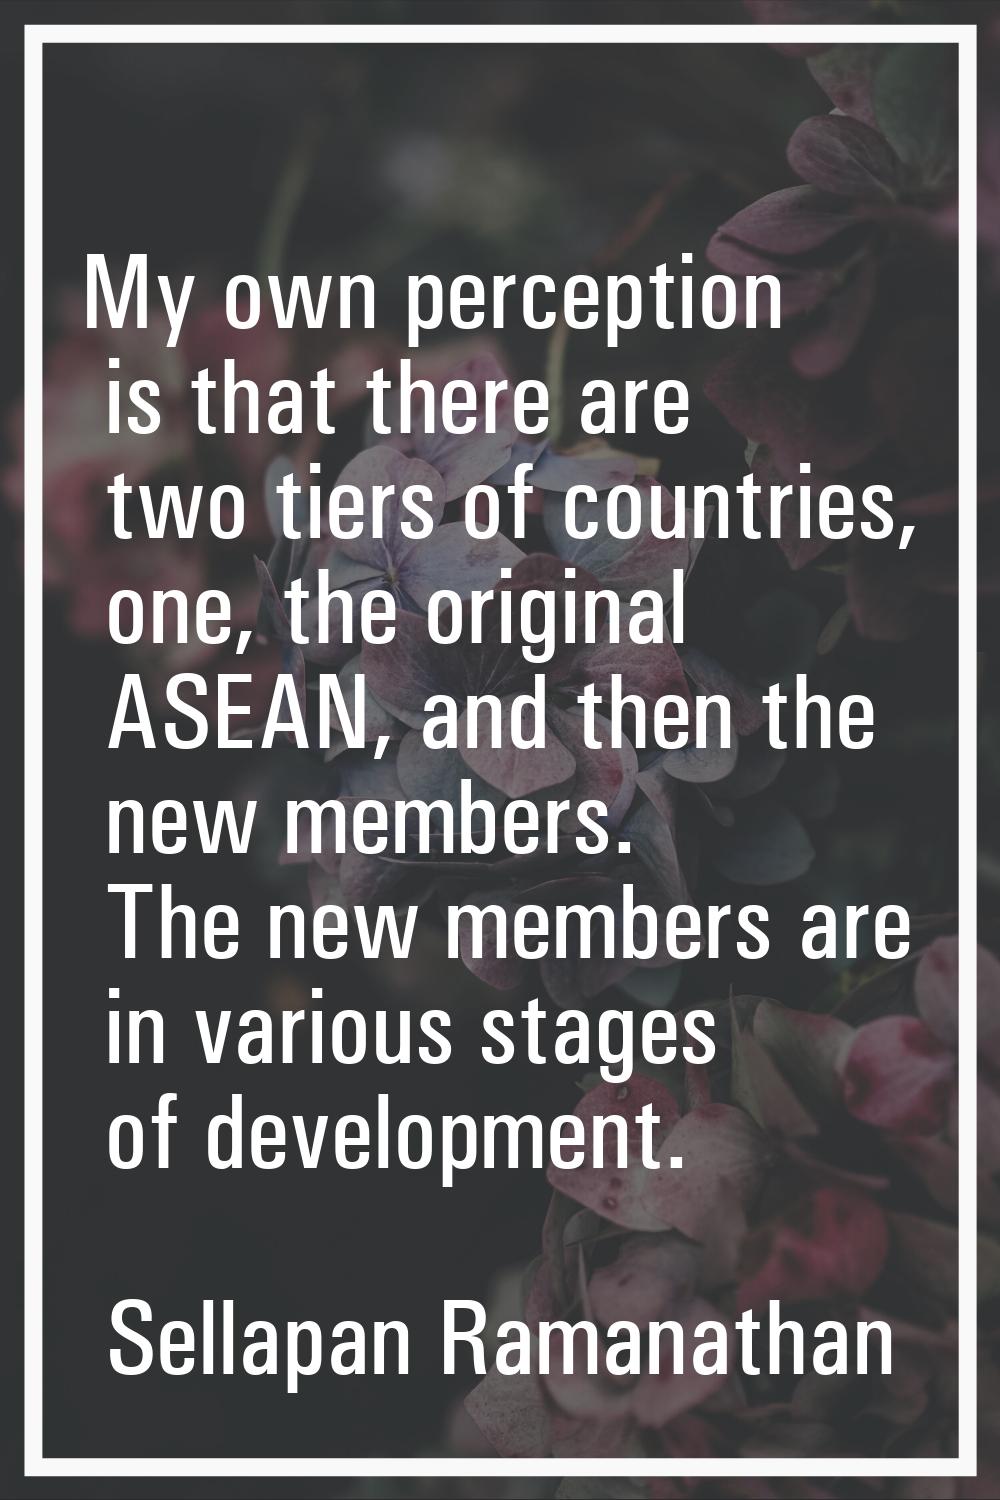 My own perception is that there are two tiers of countries, one, the original ASEAN, and then the n